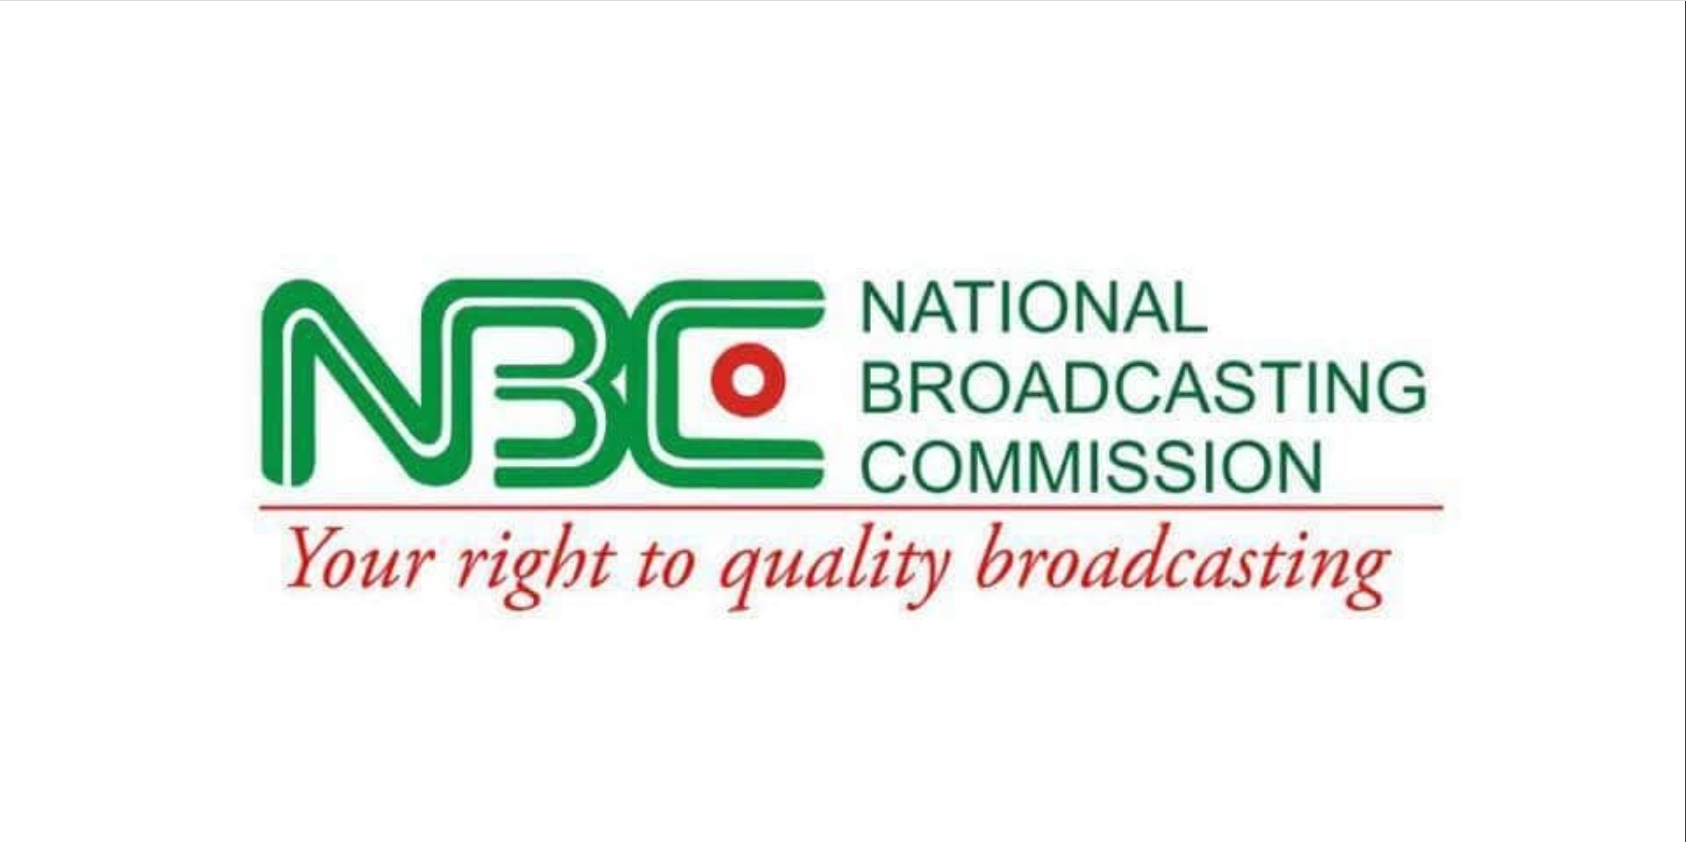 national broadcasting commission recruitment